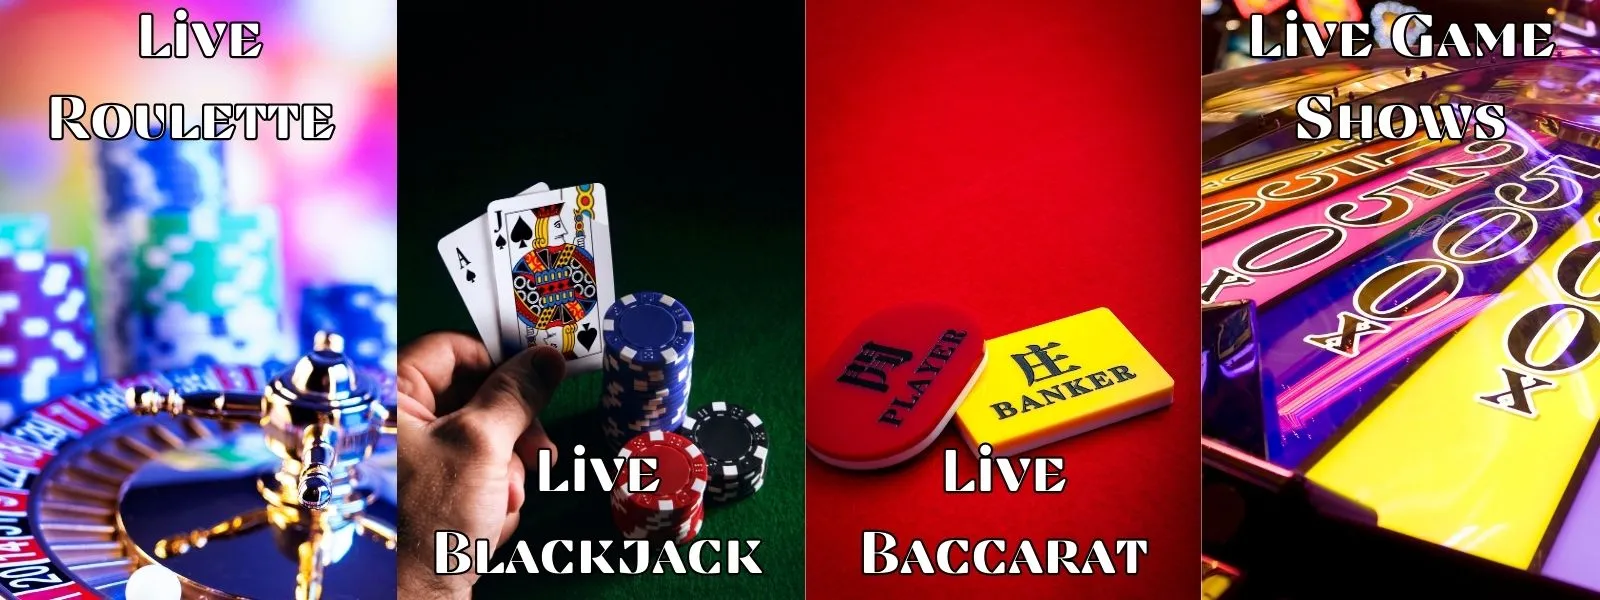 paysafecard live casinos bring back a wide selection of popular games